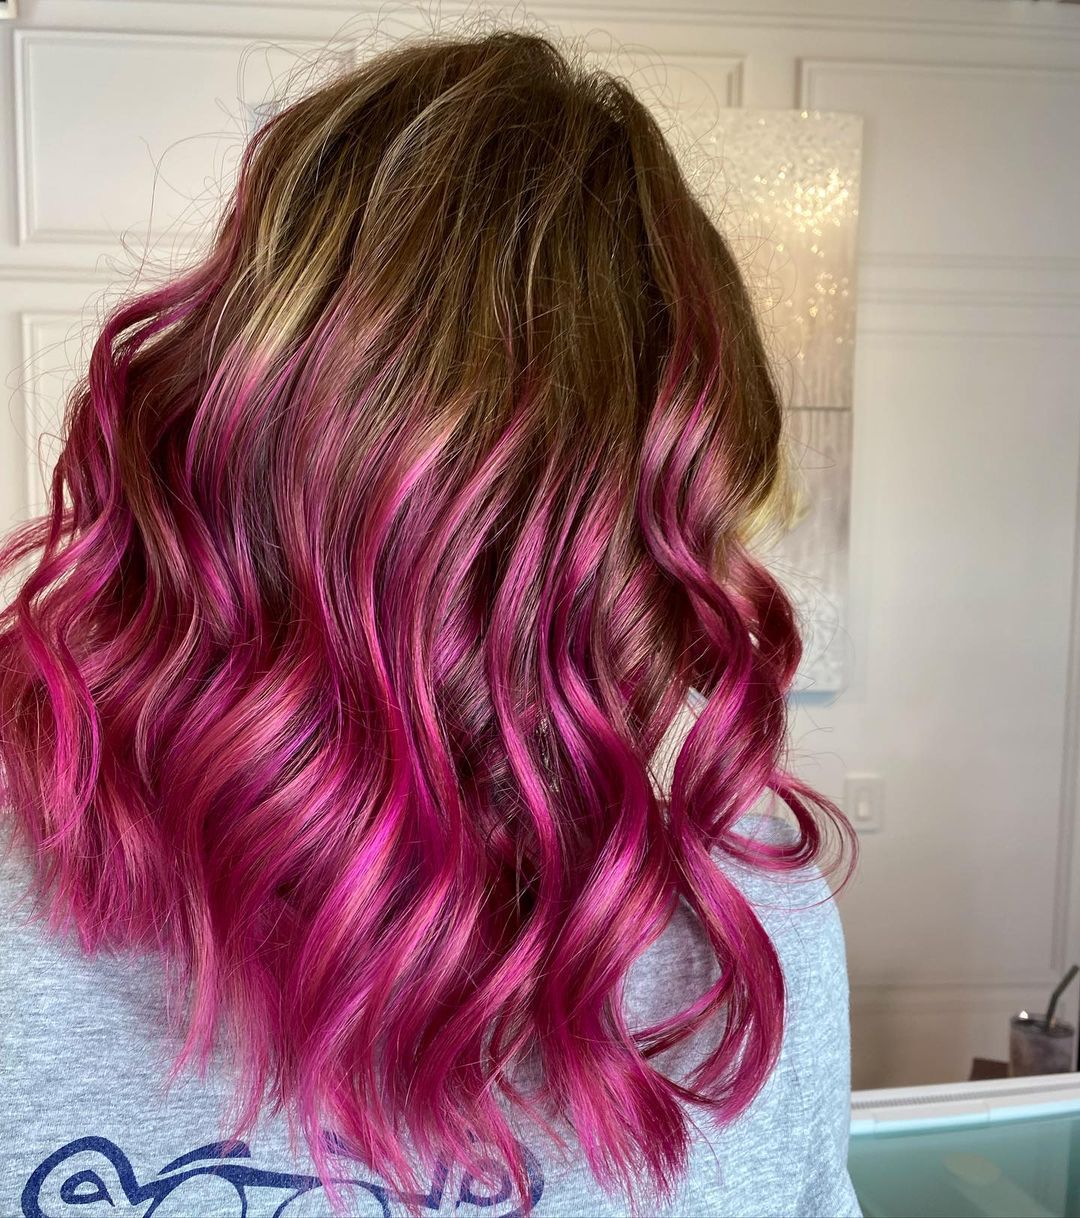 pink ombre hair color 129 Ombre pink hair blonde | Pastel pink ombre hair | Pink balayage Hair Pink Ombre Hair Color for Women